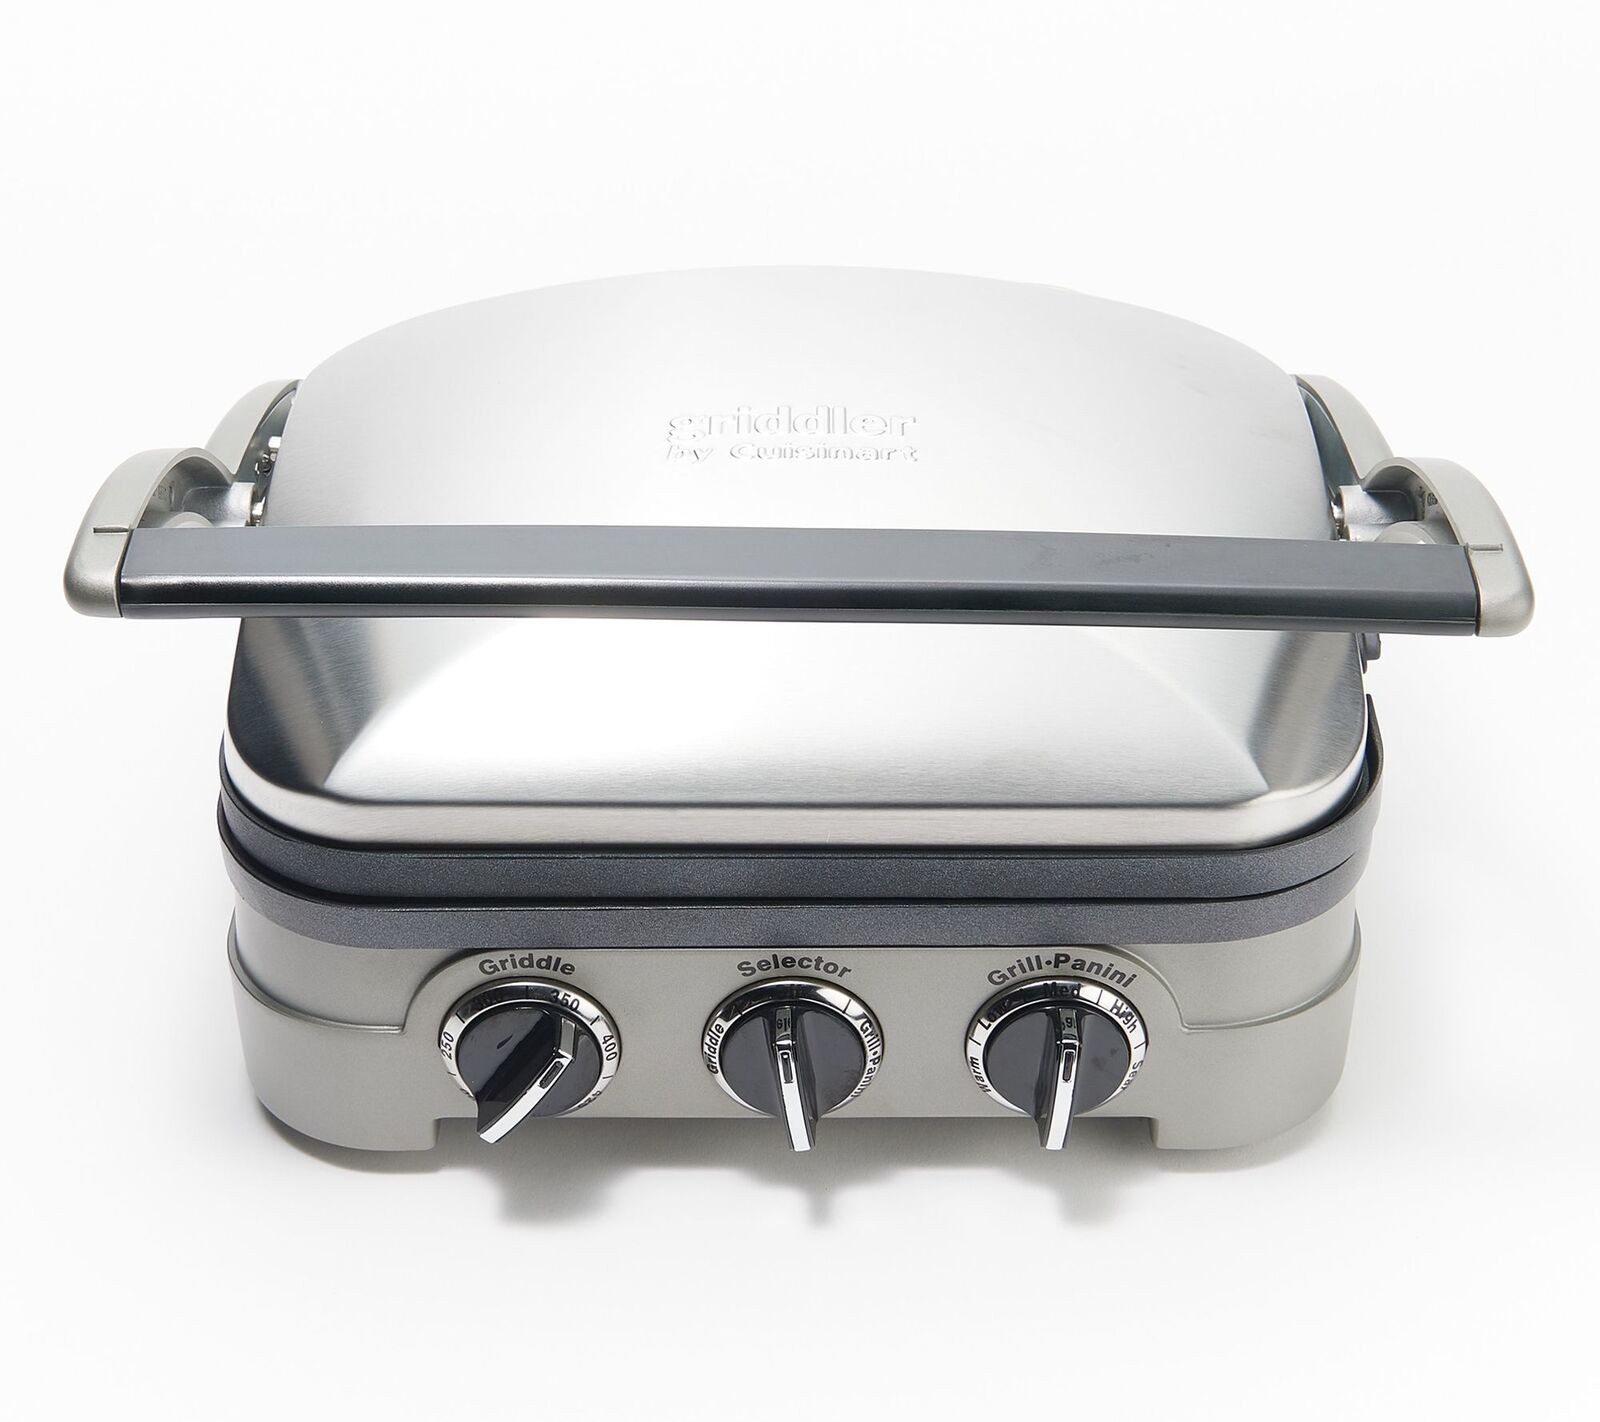 Cuisinart 5-in-1 Electric Nonstick Grill & Griddle    USED - $67.89